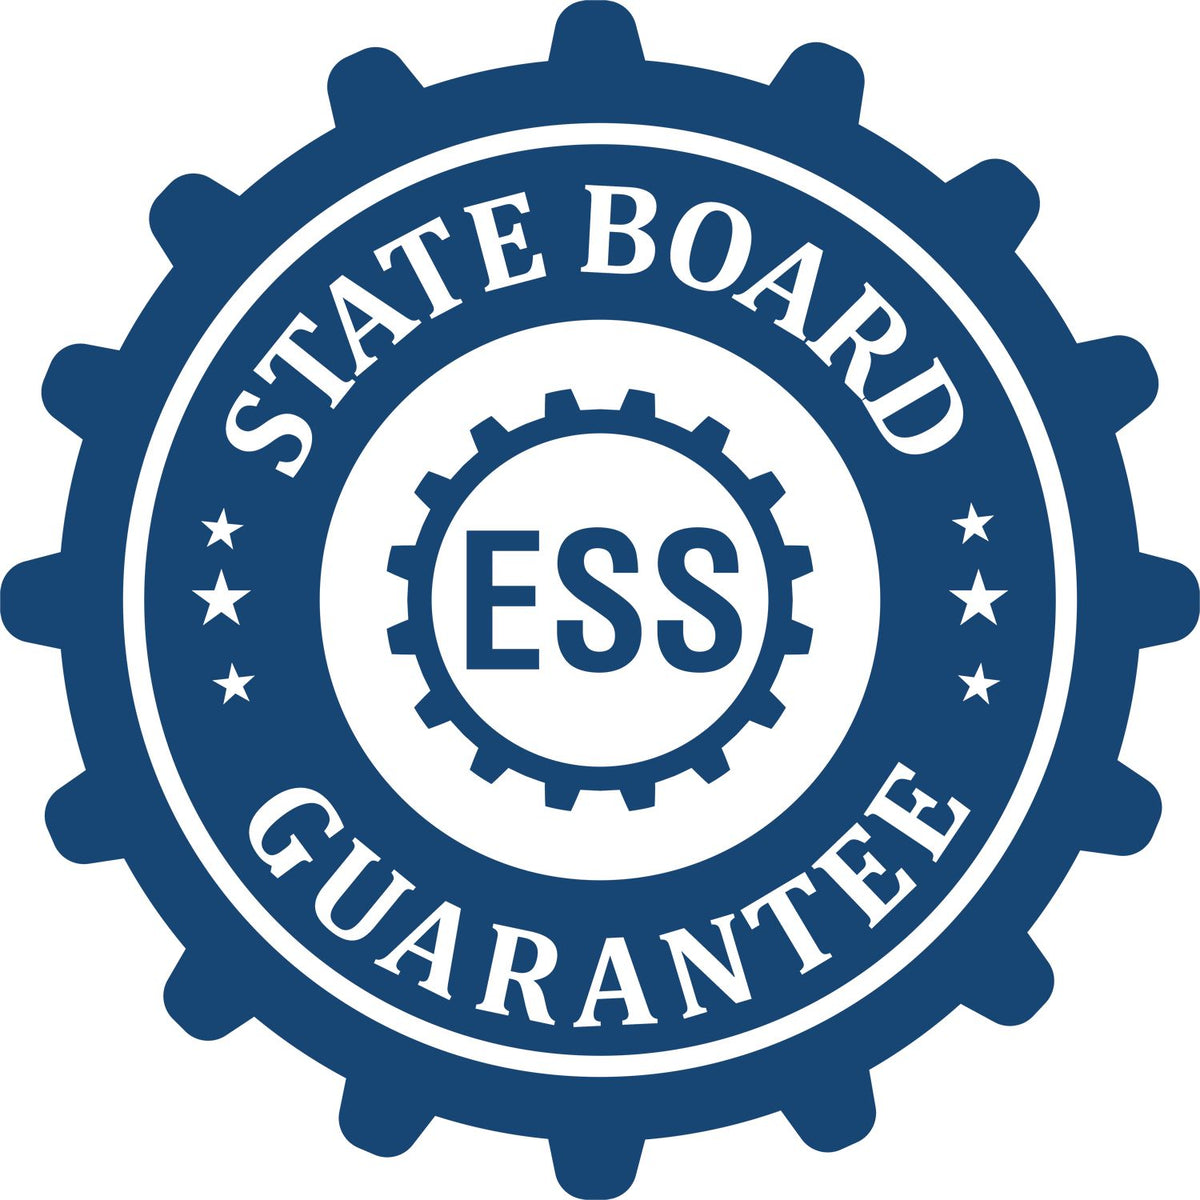 An emblem in a gear shape illustrating a state board guarantee for the Indiana Geologist Desk Seal